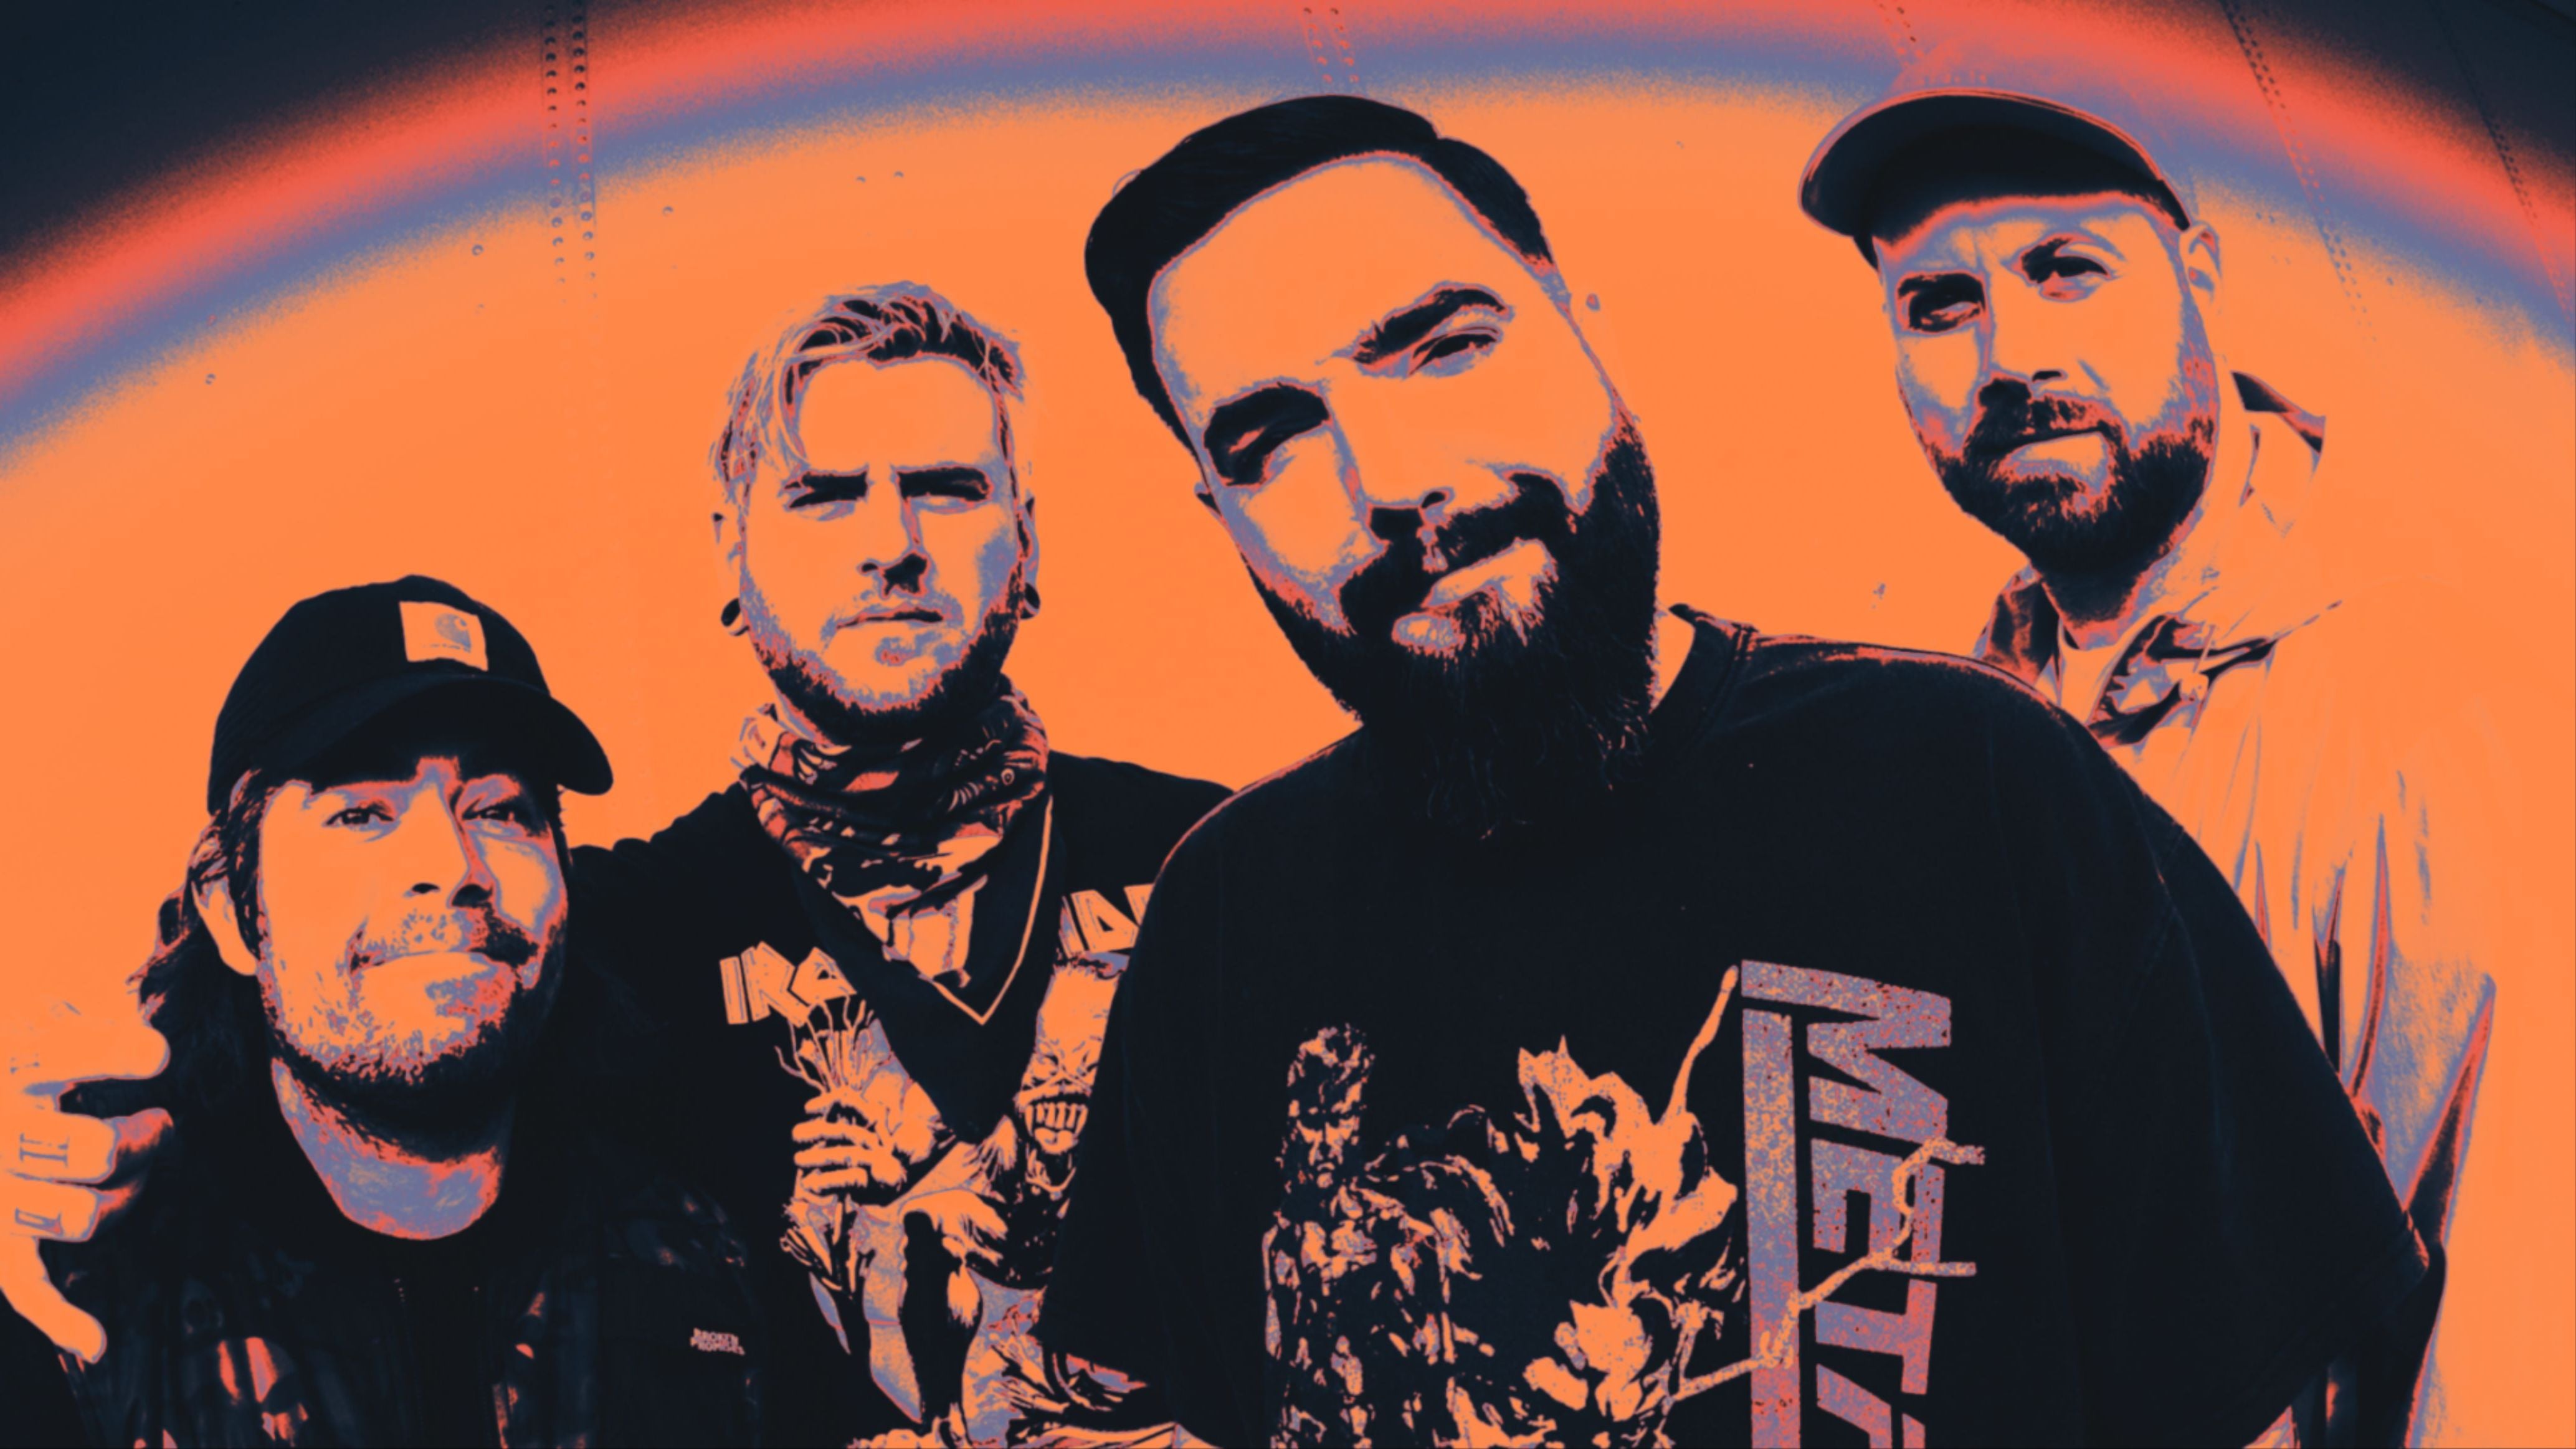 More Info for A Day to Remember – Just Some Shows